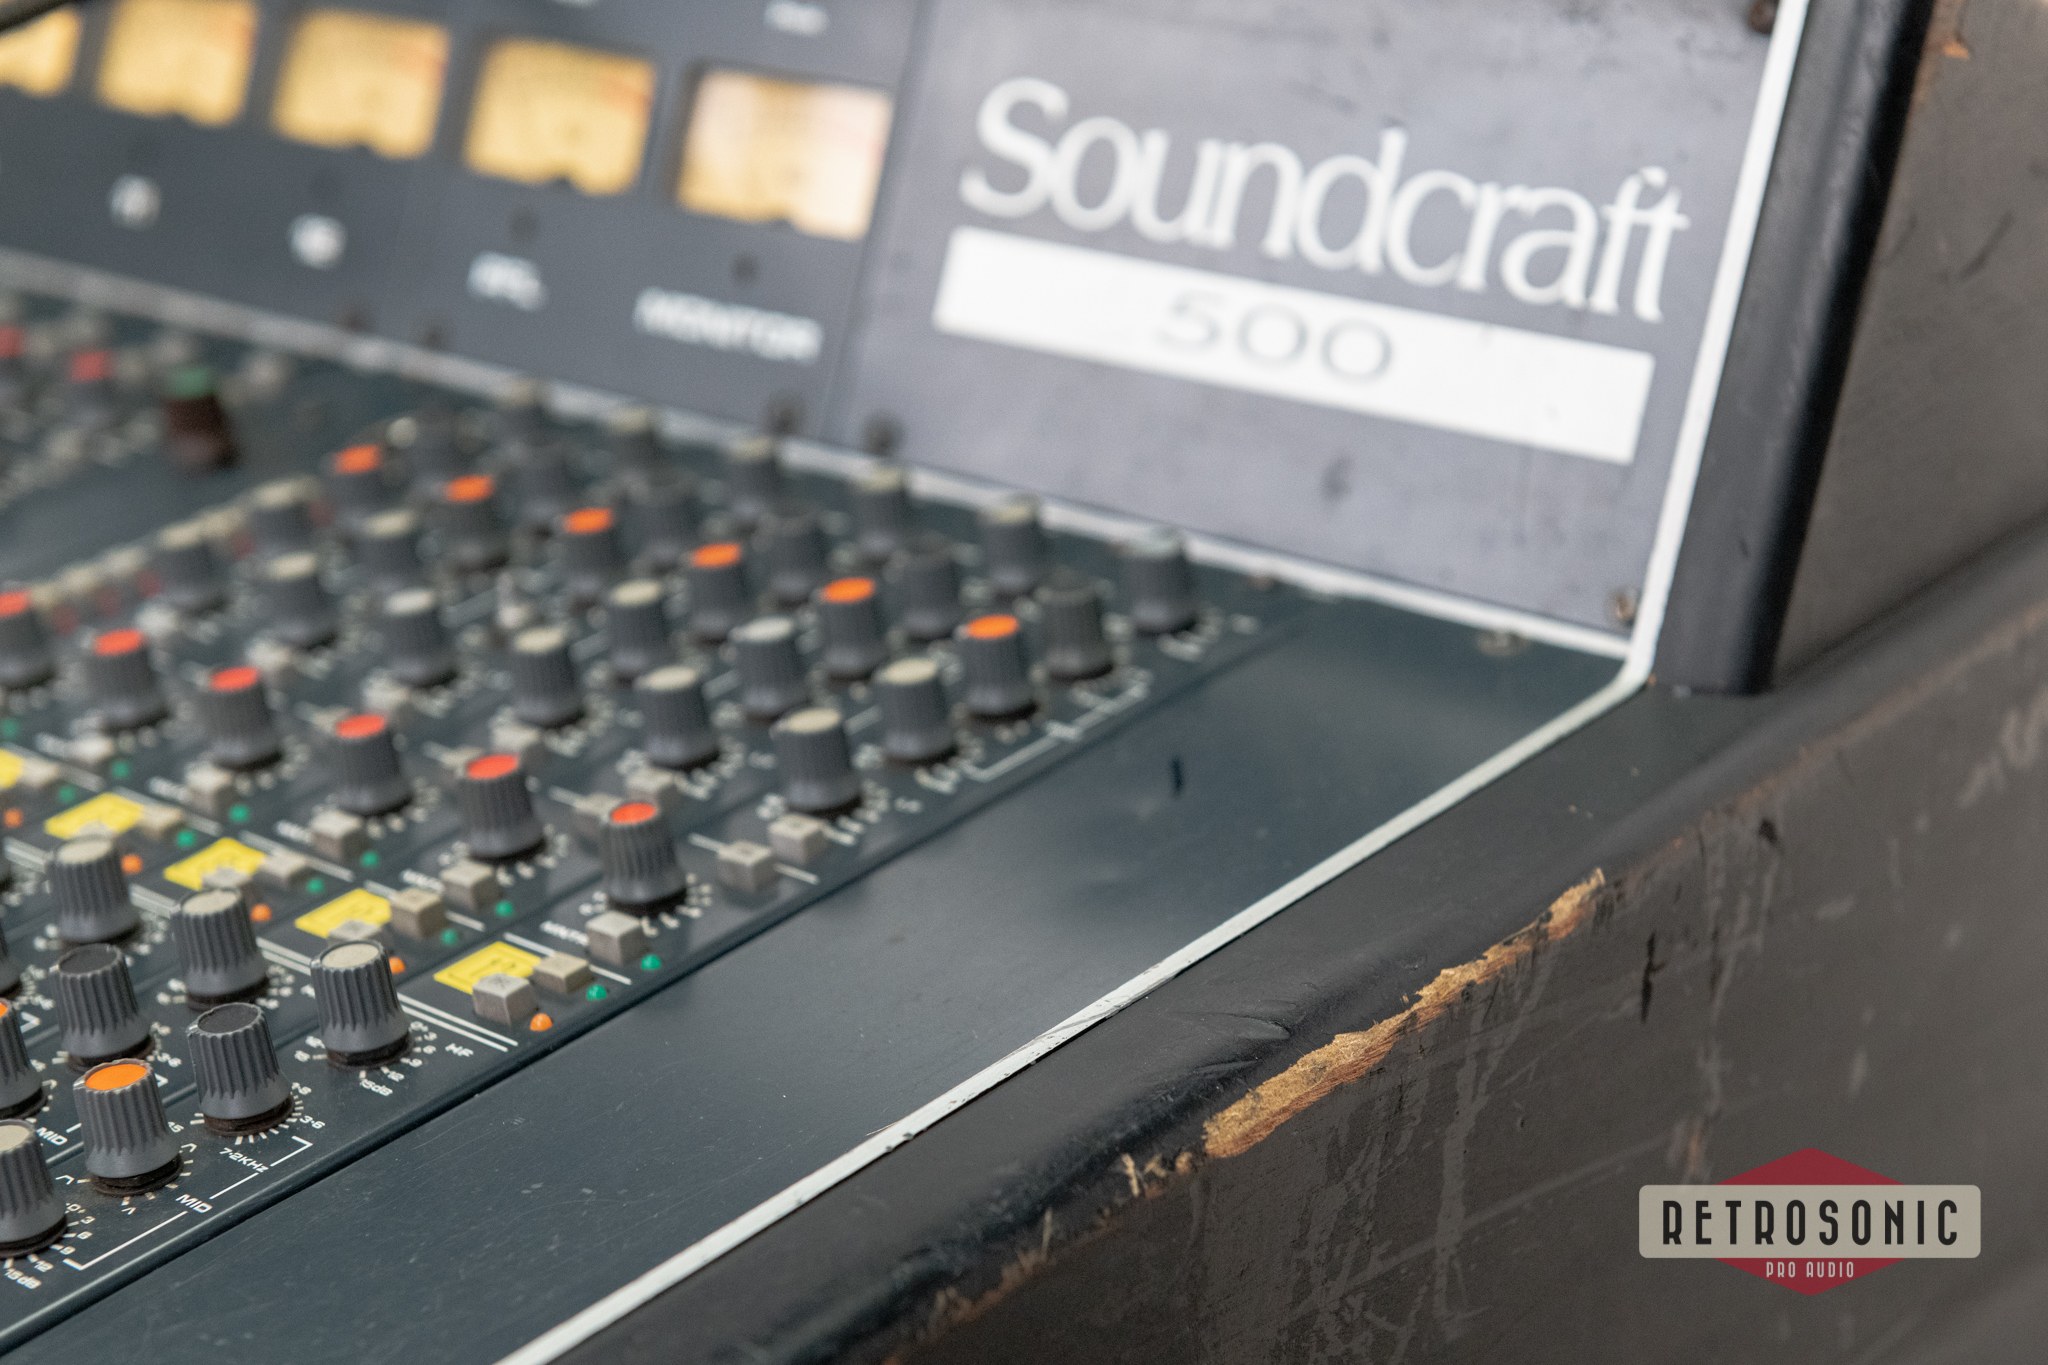 Soundcraft Series 500M 8-Channel Sidecar with Summing and PSU